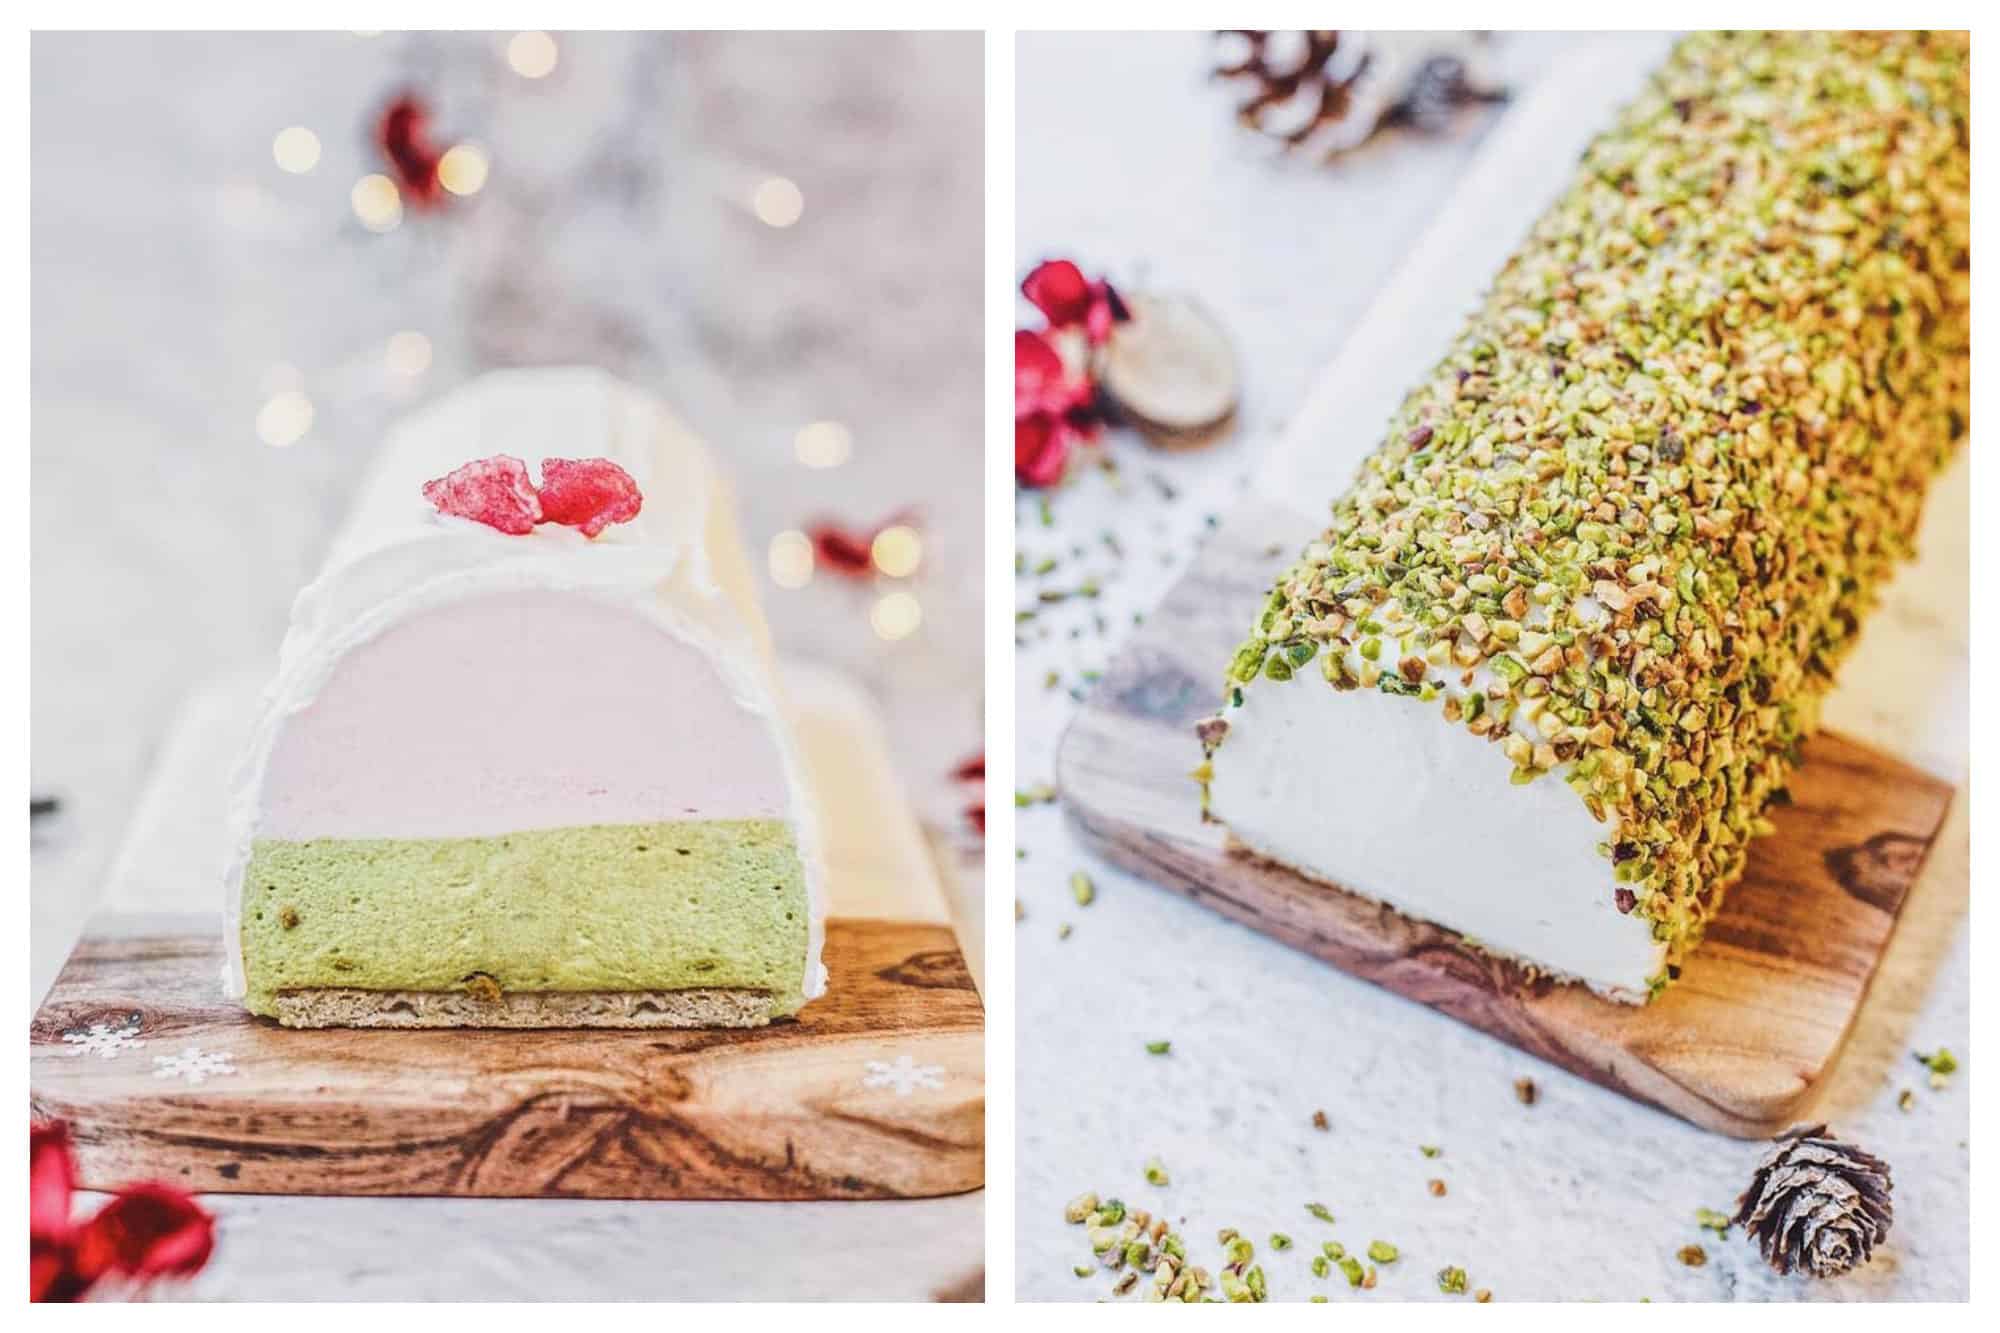 A strawberry and pistachio ice cream cake covered with crushed pistachios